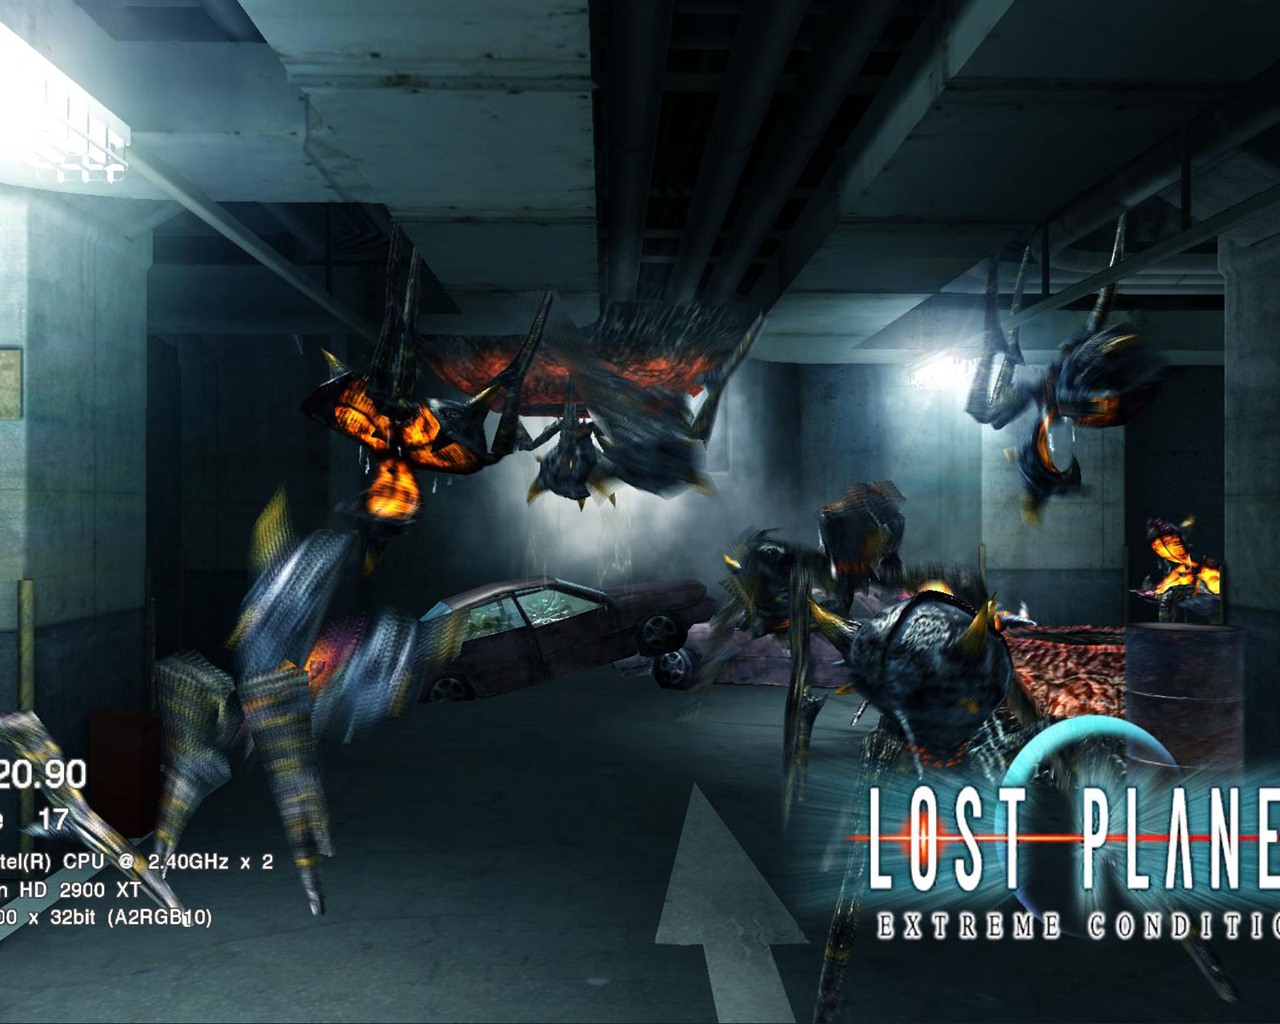 Lost Planet: Extreme Condition HD tapety na plochu #17 - 1280x1024